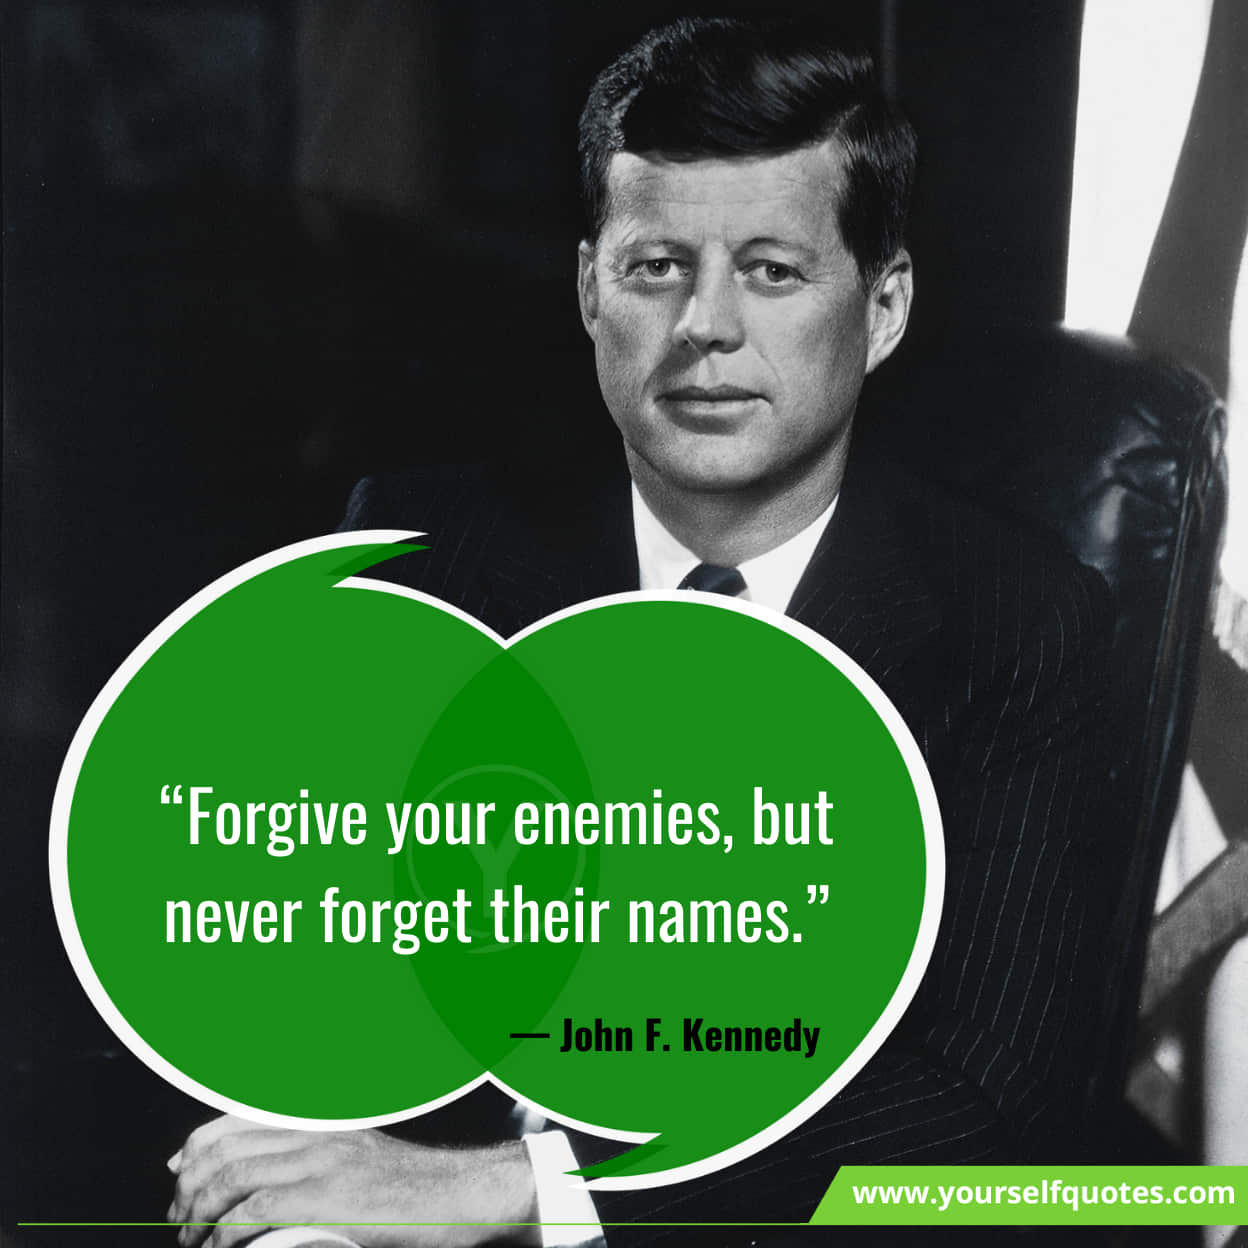 Famous Quotes of John F Kennedy